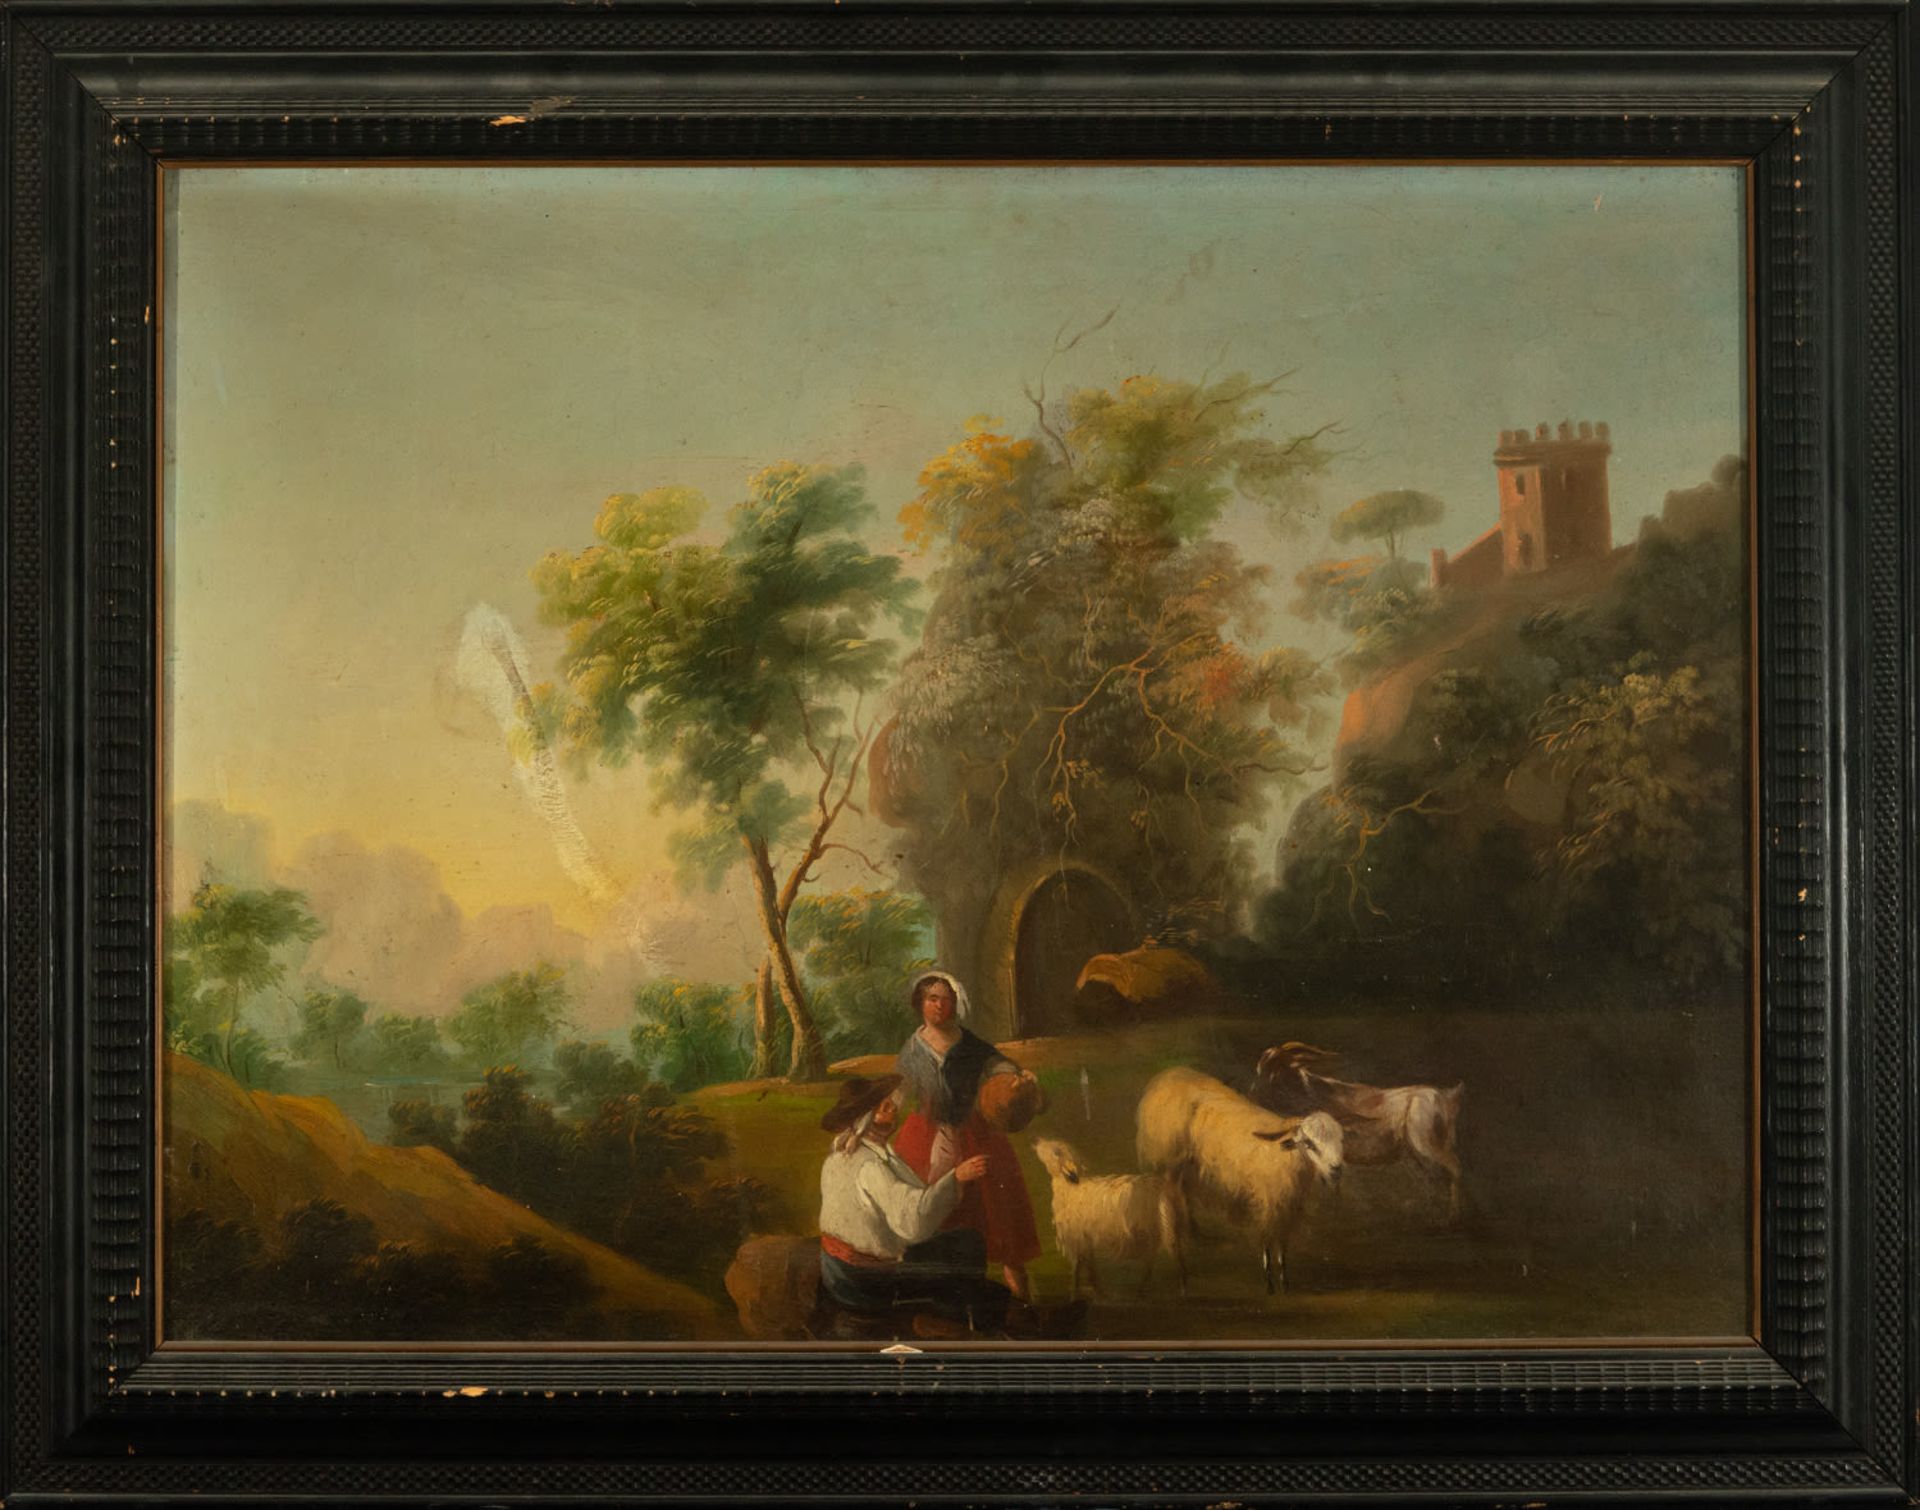 Pair of pastoral scenes on canvas, 19th century French school - Image 3 of 11